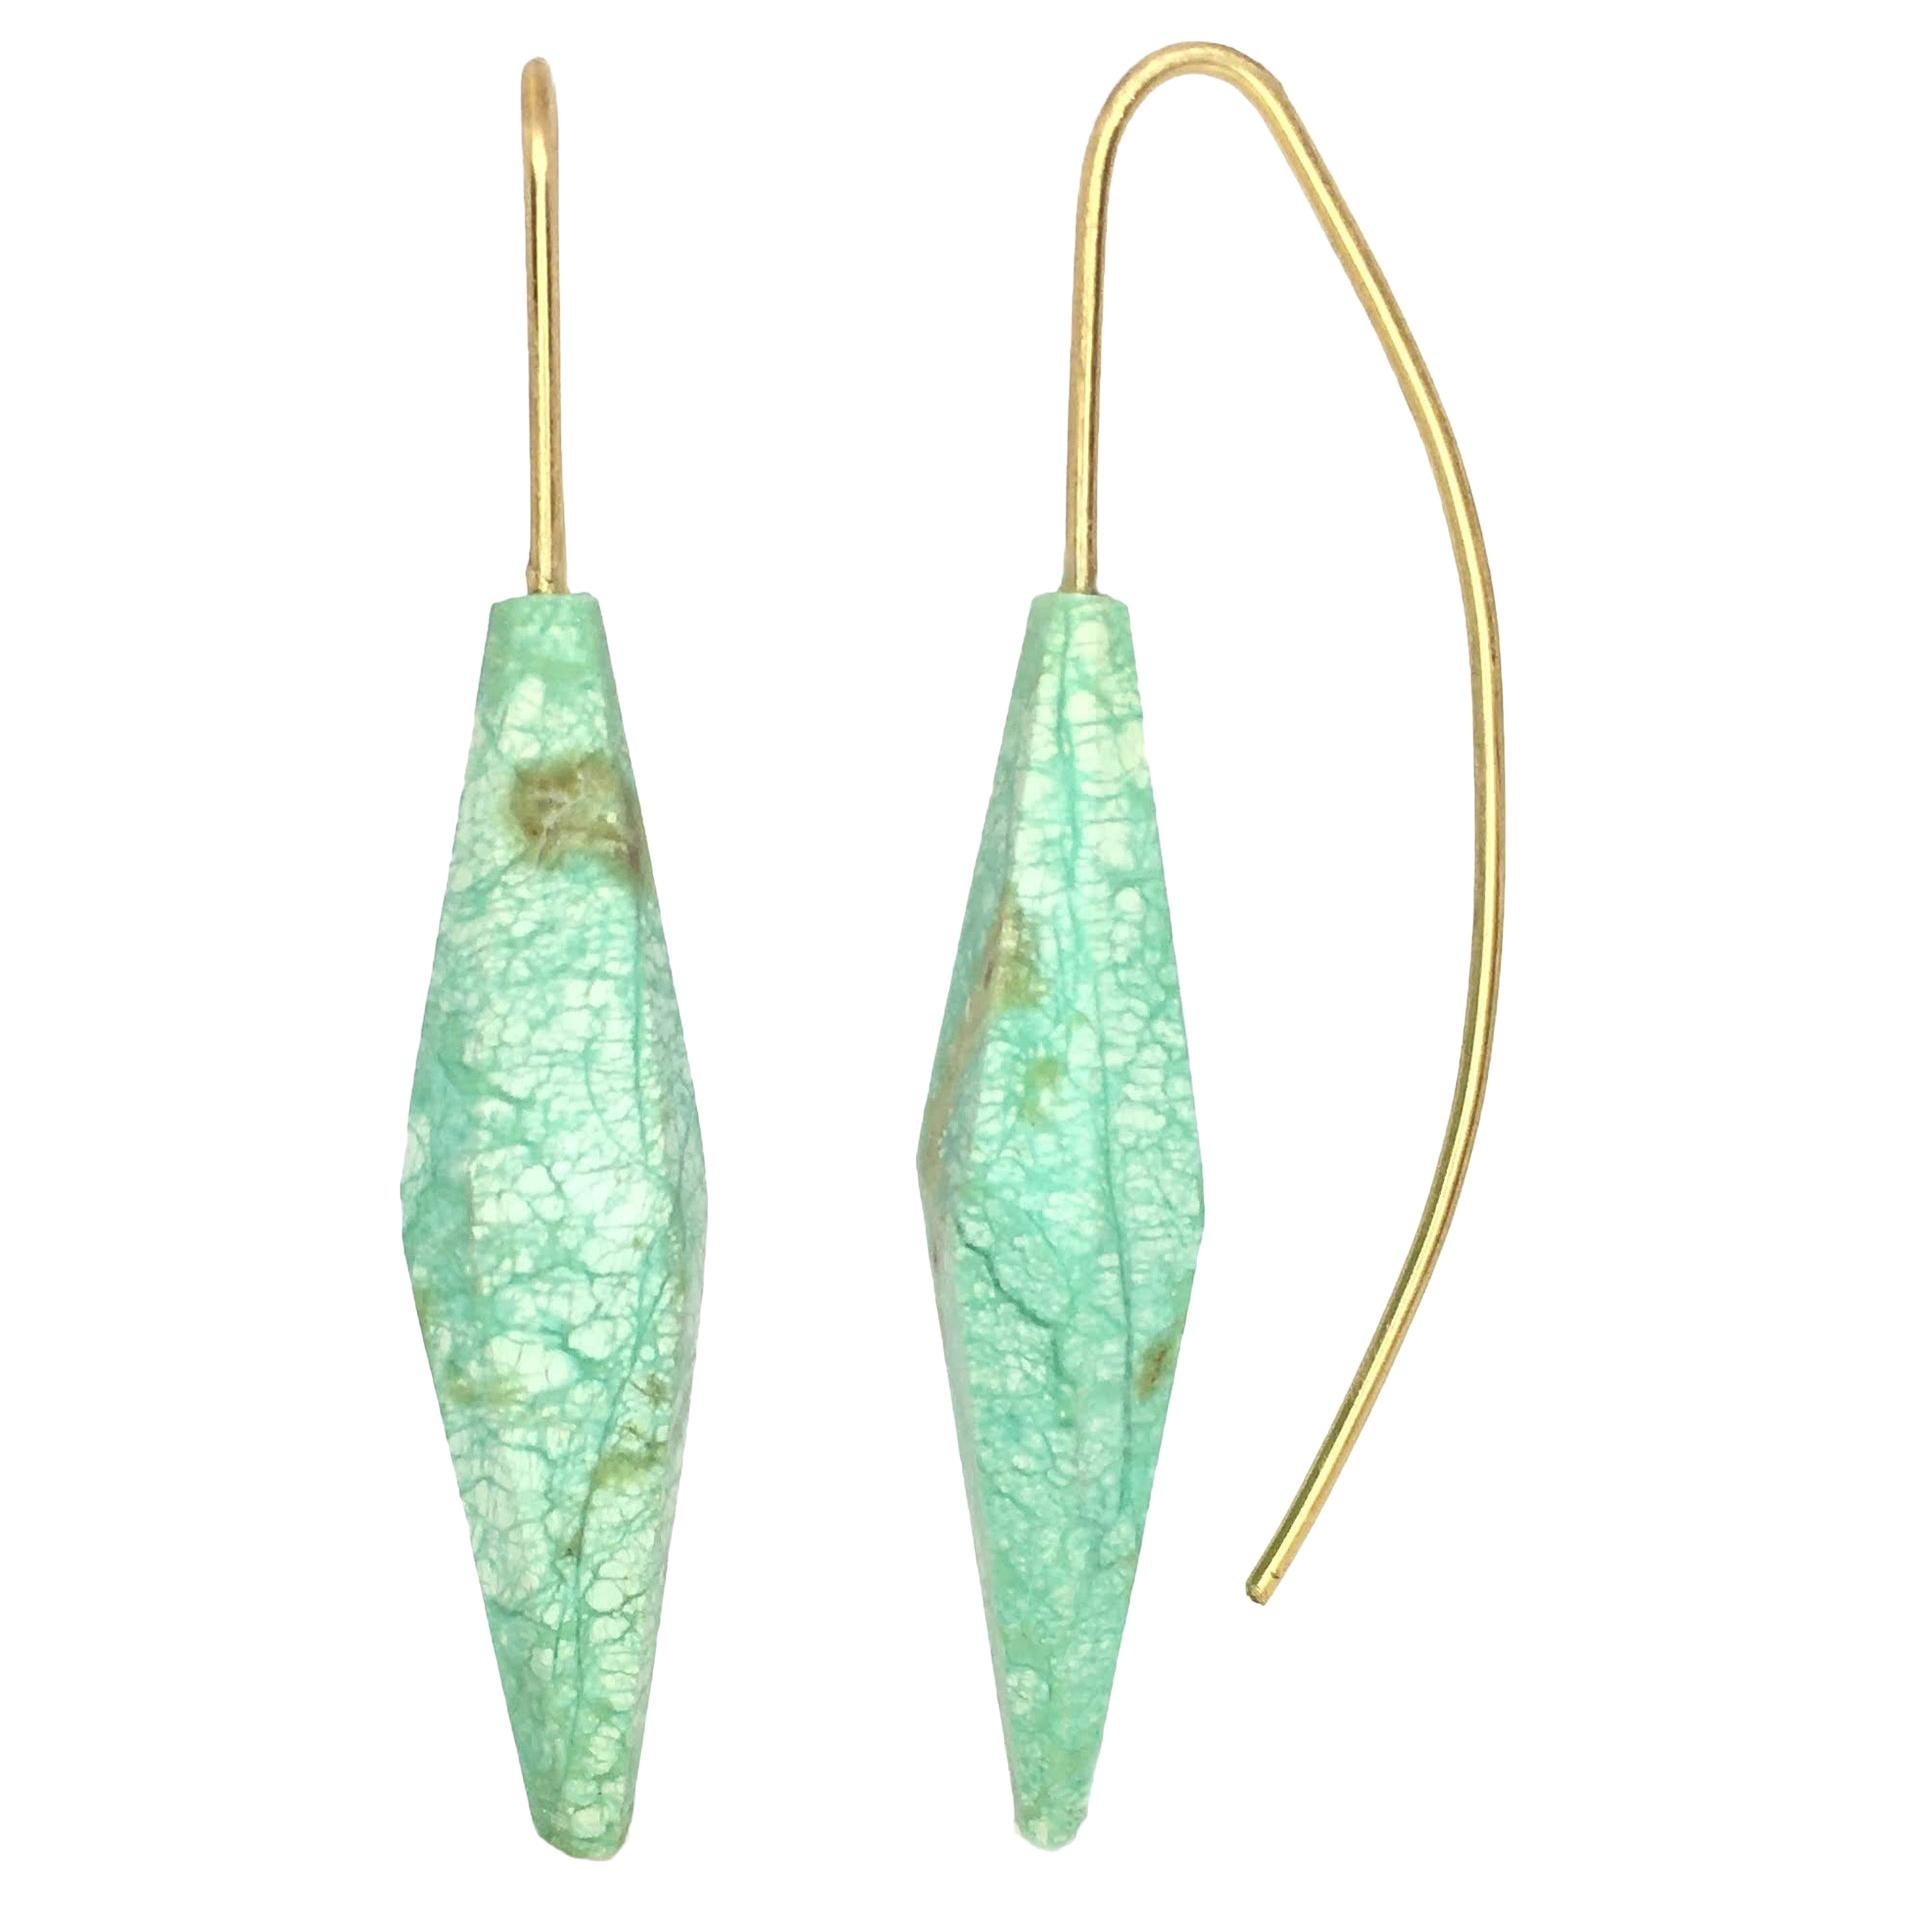 Sculpted Chrysoprase Beads on Gold Wire Earrings For Sale